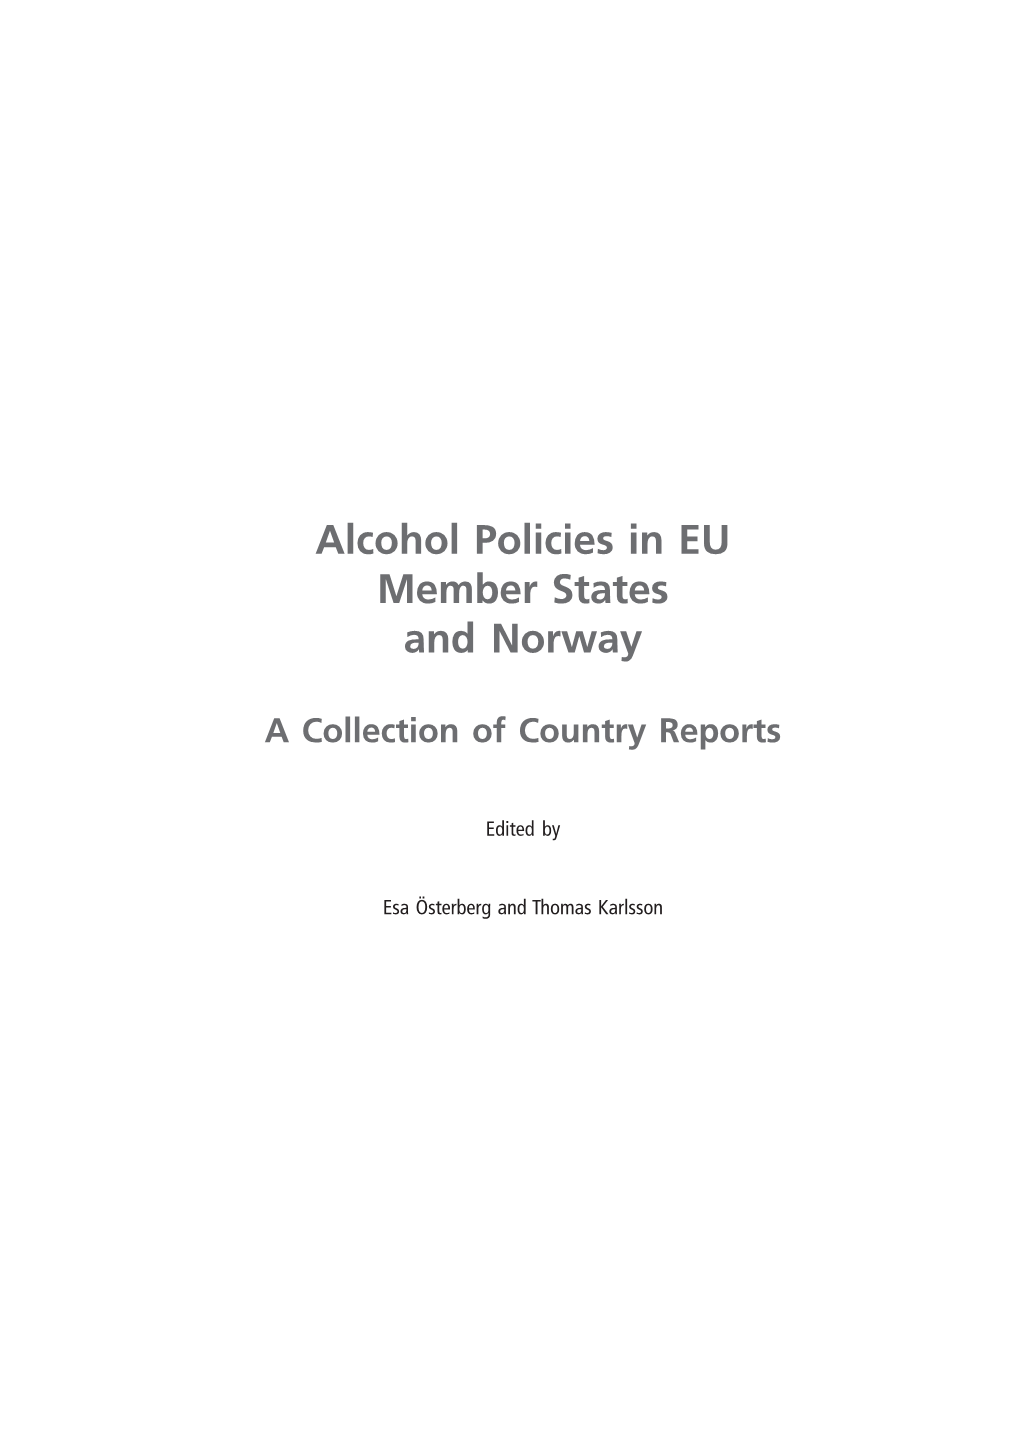 Alcohol Policies in EU Member States and Norway